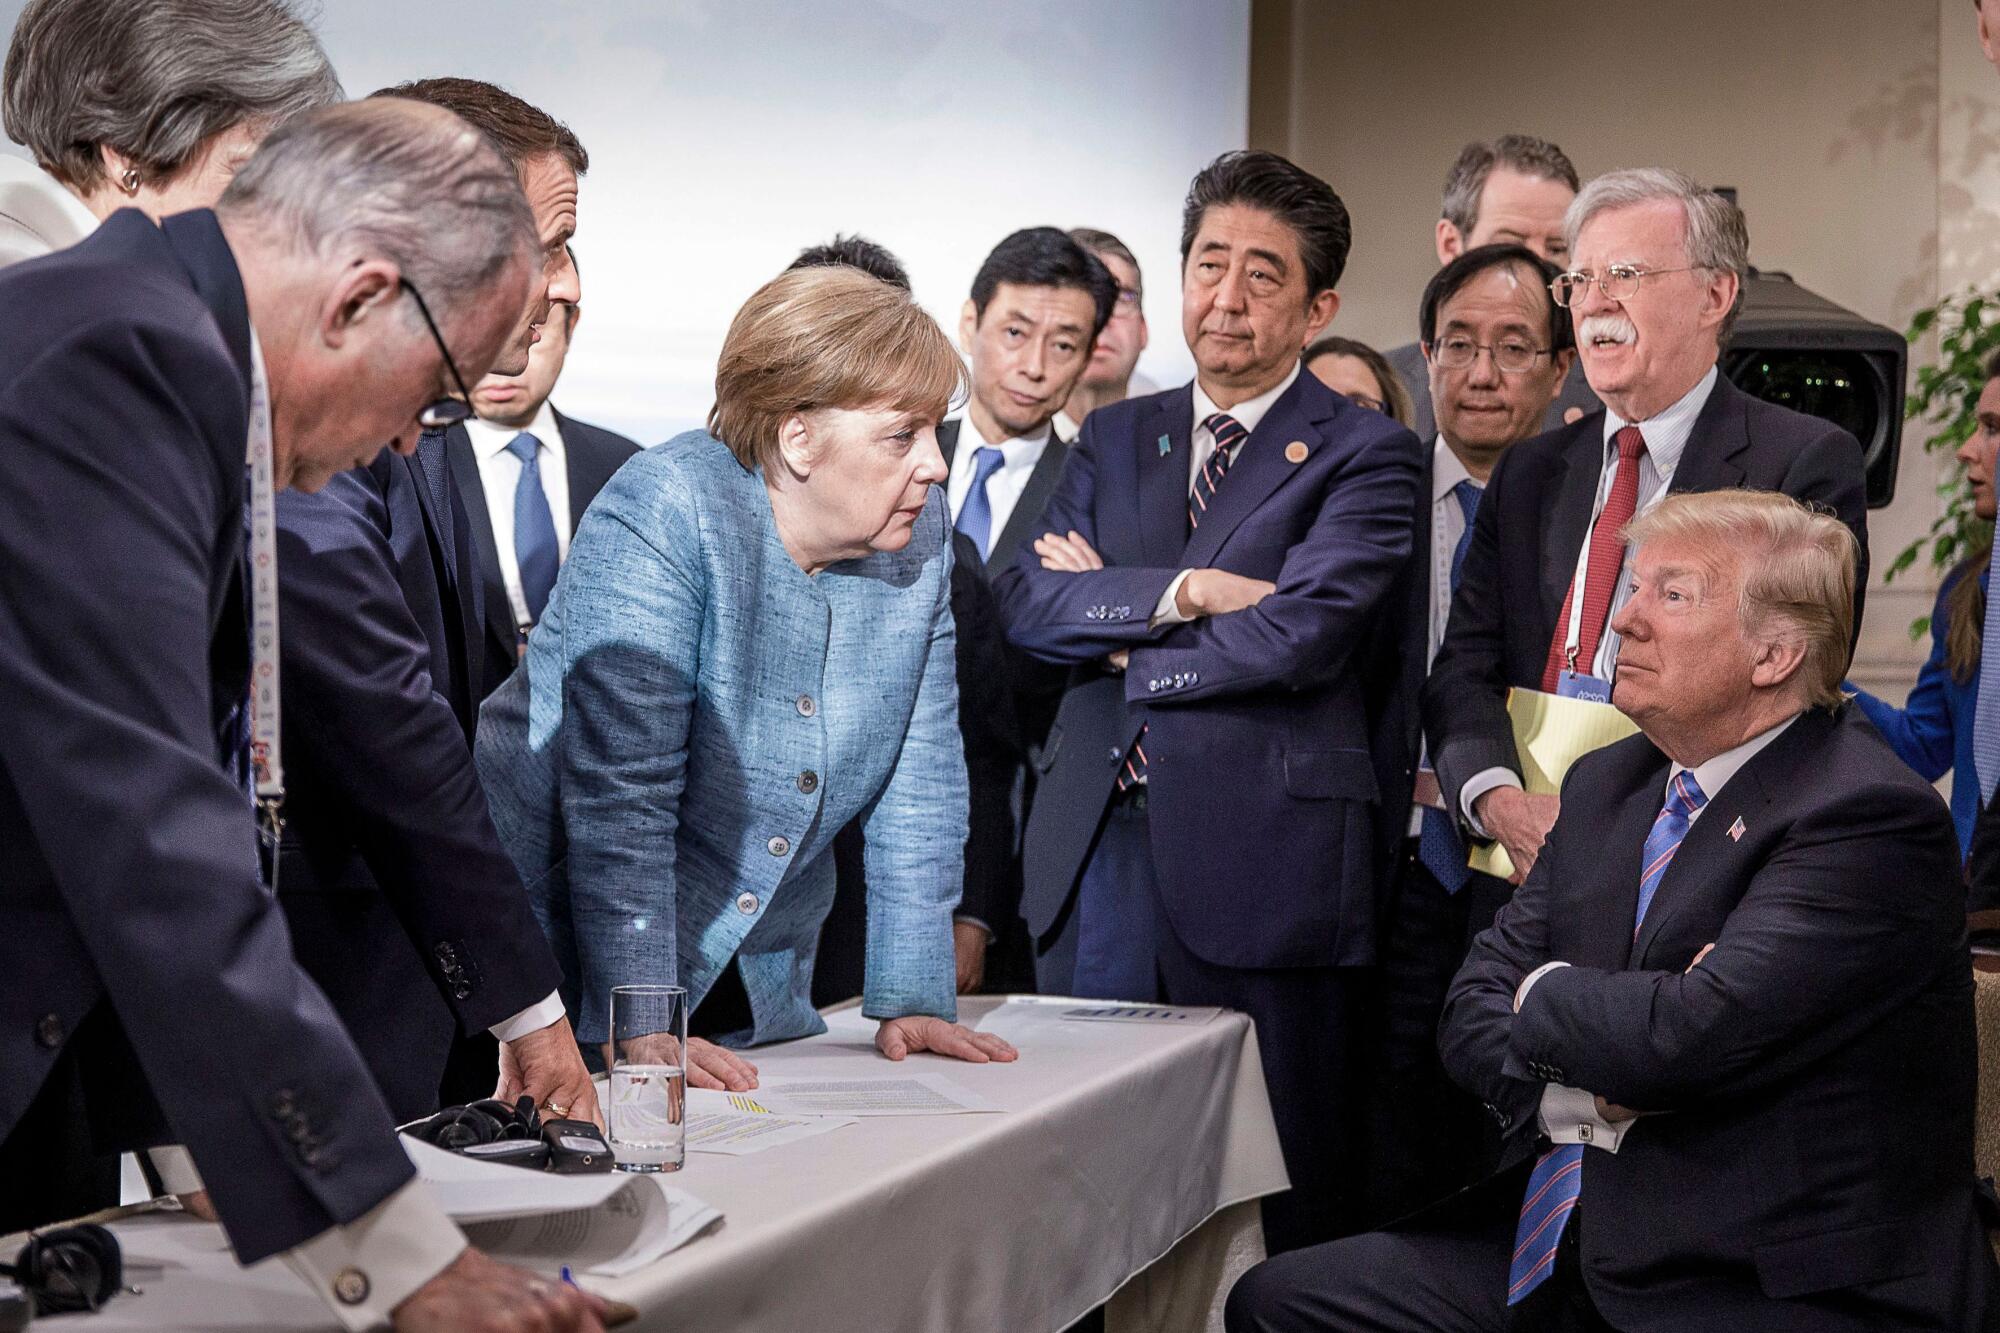 In 2018, Japanese Prime Minister Shinzo Abe, center, at Group of 7 summit in Charlevoix, Canada.